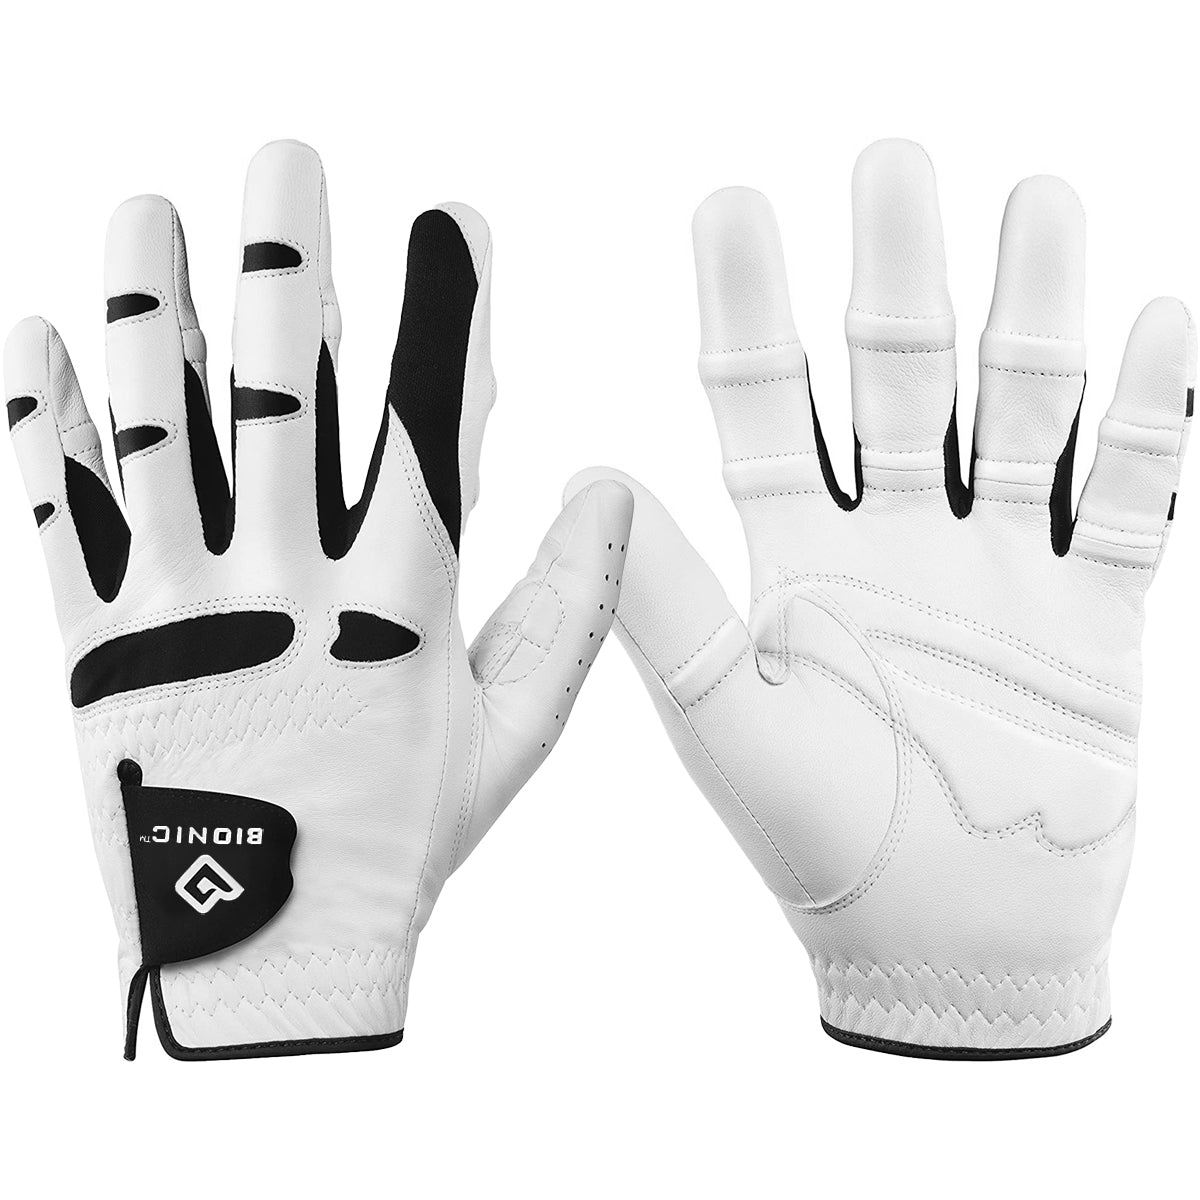 Bionic Men's Left Hand Stable Grip 2.0 Dual Expansion Zone Golf Glove - White Bionic